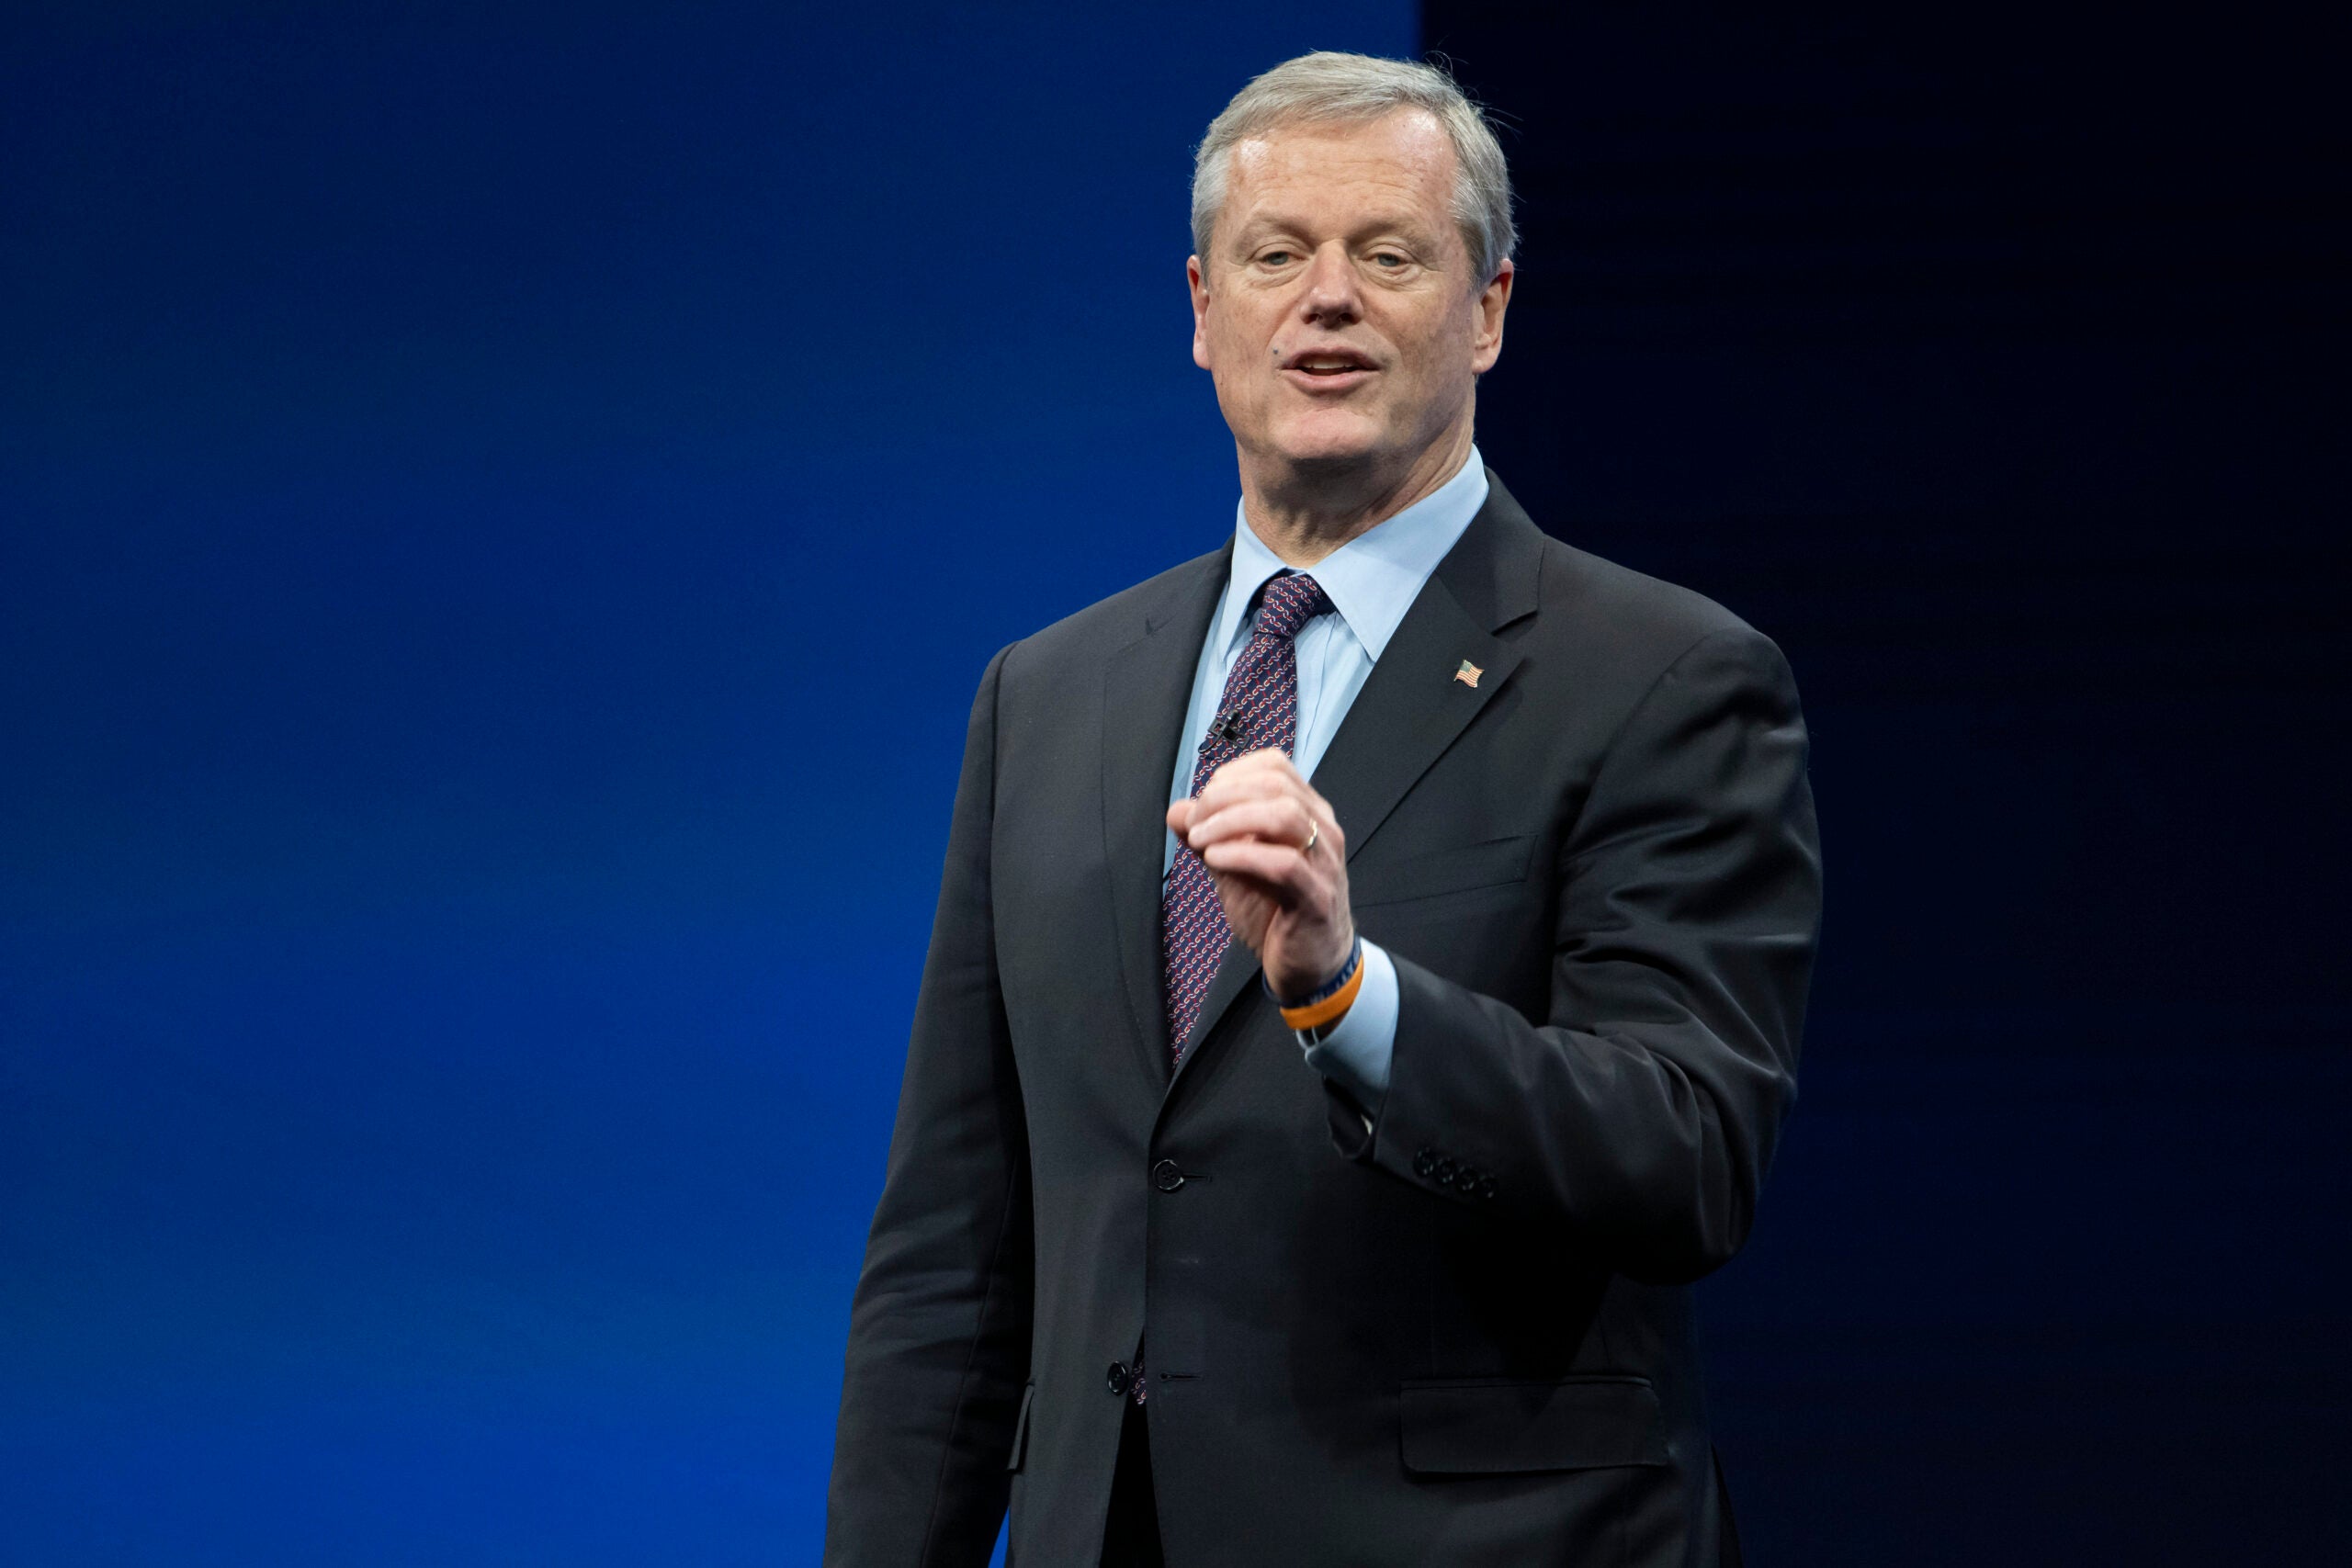 Incoming NCAA president Charlie Baker speaks during the NCAA Convention, Thursday, Jan. 12, 2023.